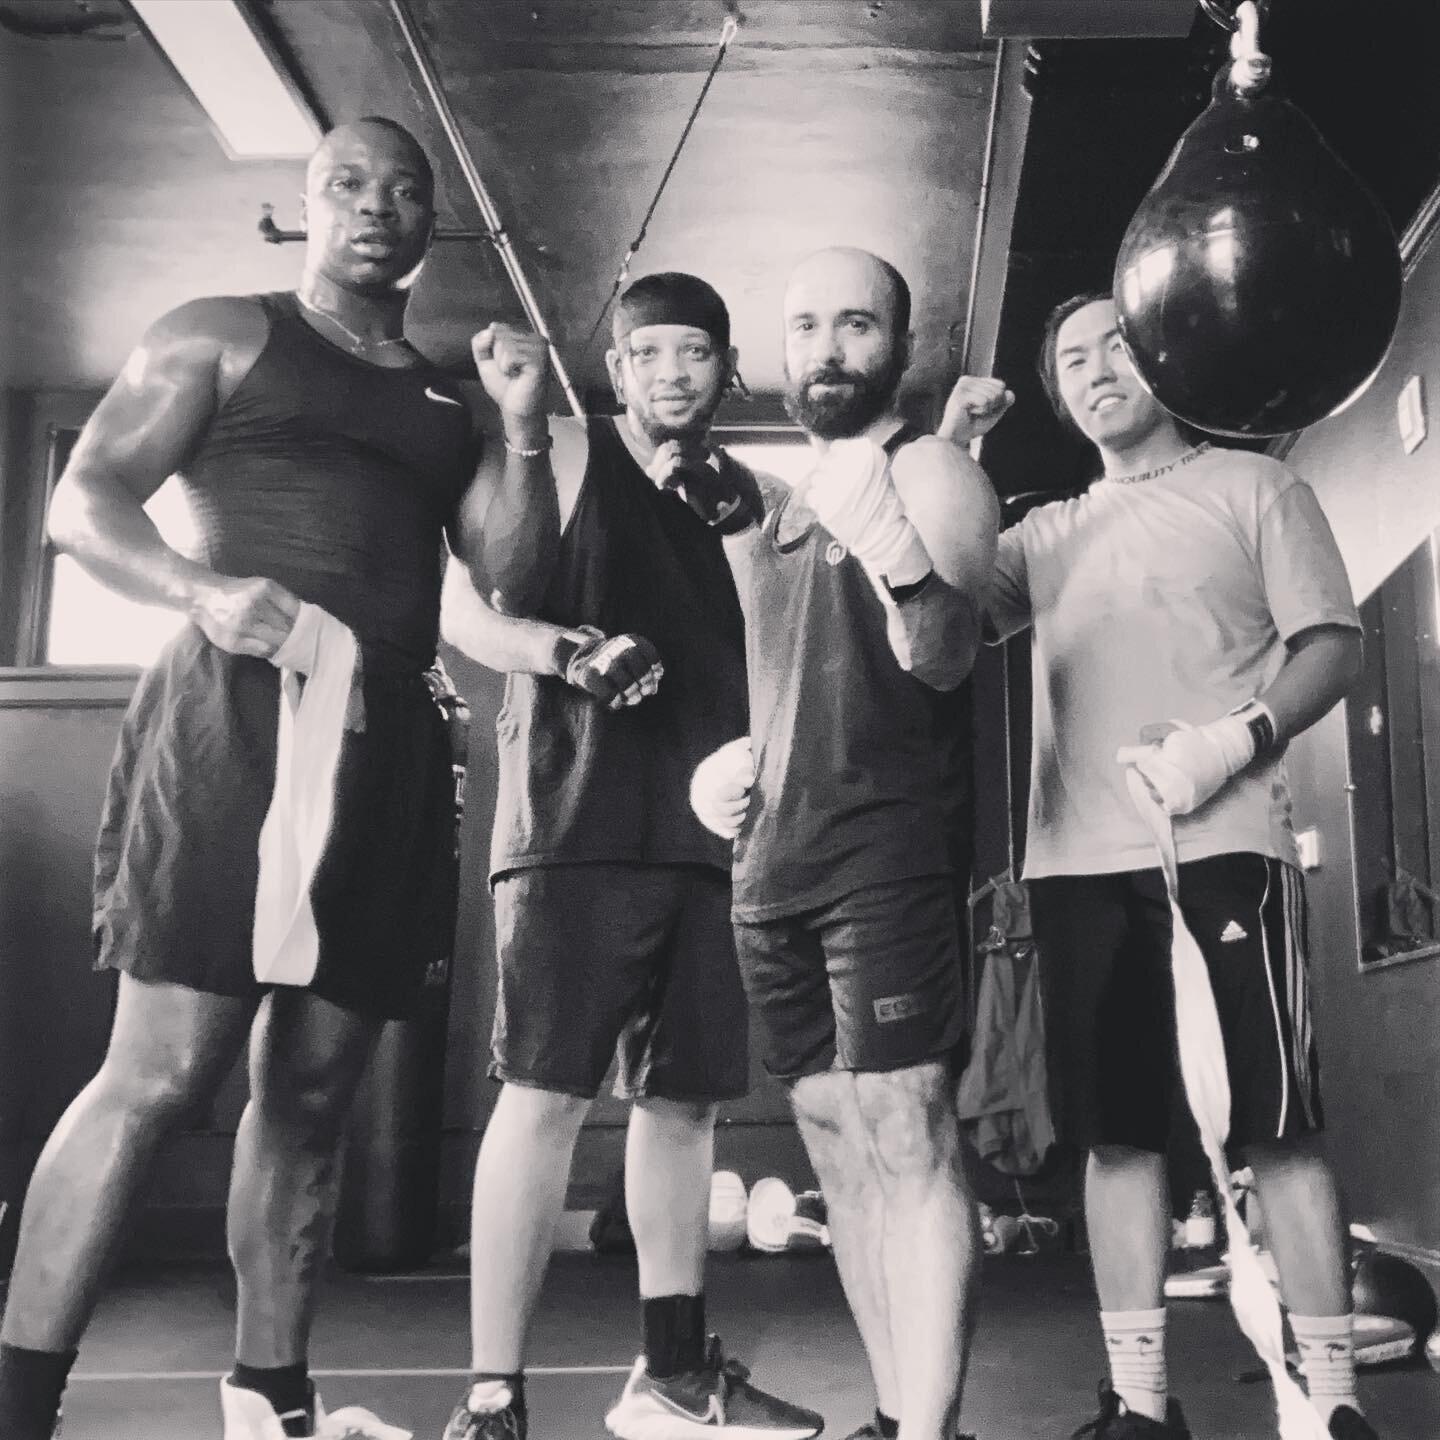 4 private morning sessions today and then 8 rounds of sparring in the afternoon with these fine gentlemen. Some serious work today.
Can you spot the golden glove fighter?
#weareallalive #boxing #boxinggym #martialarts #boxingtraining #goldengloves #f